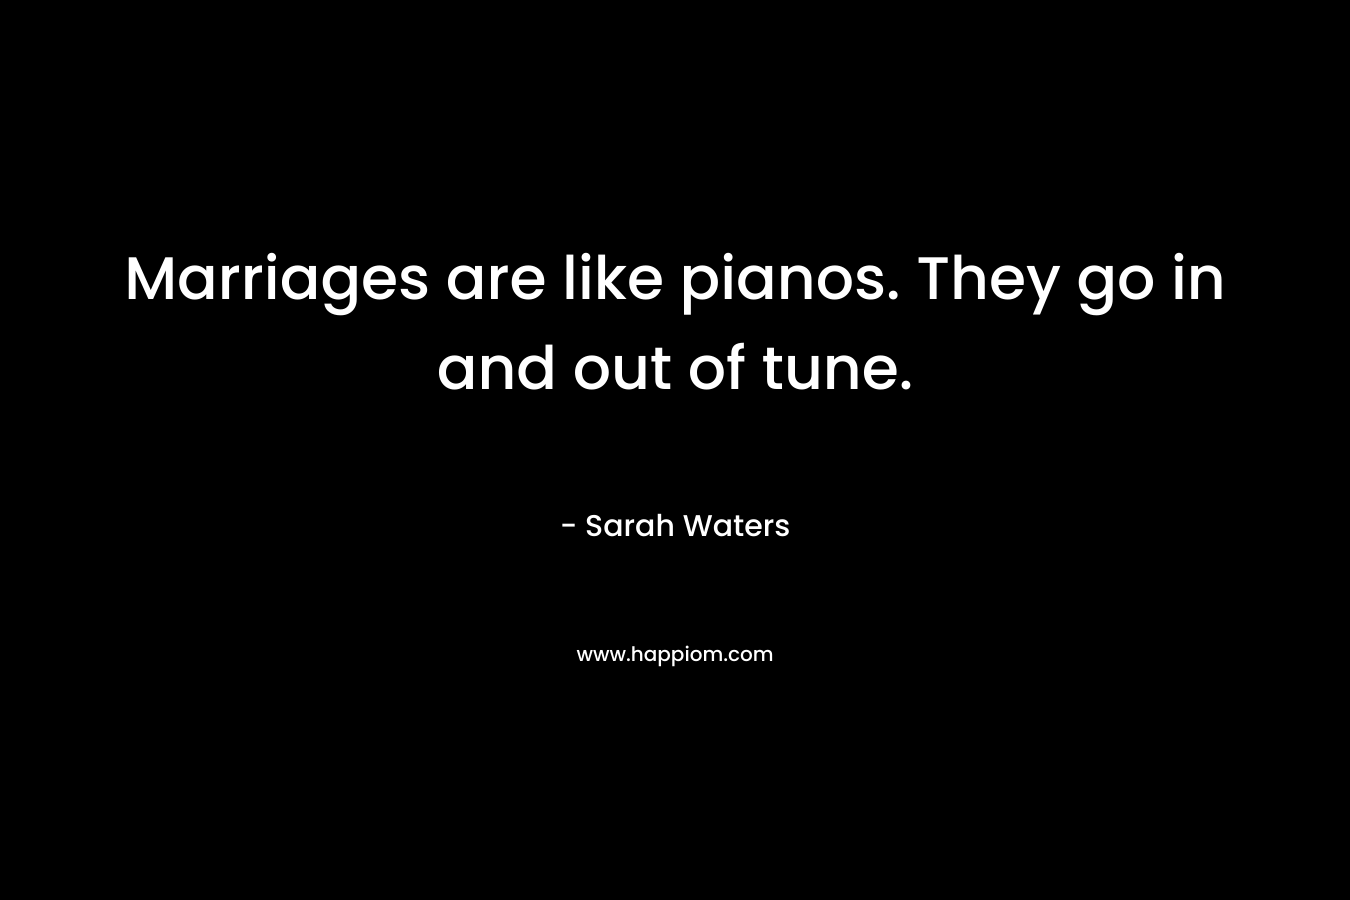 Marriages are like pianos. They go in and out of tune.